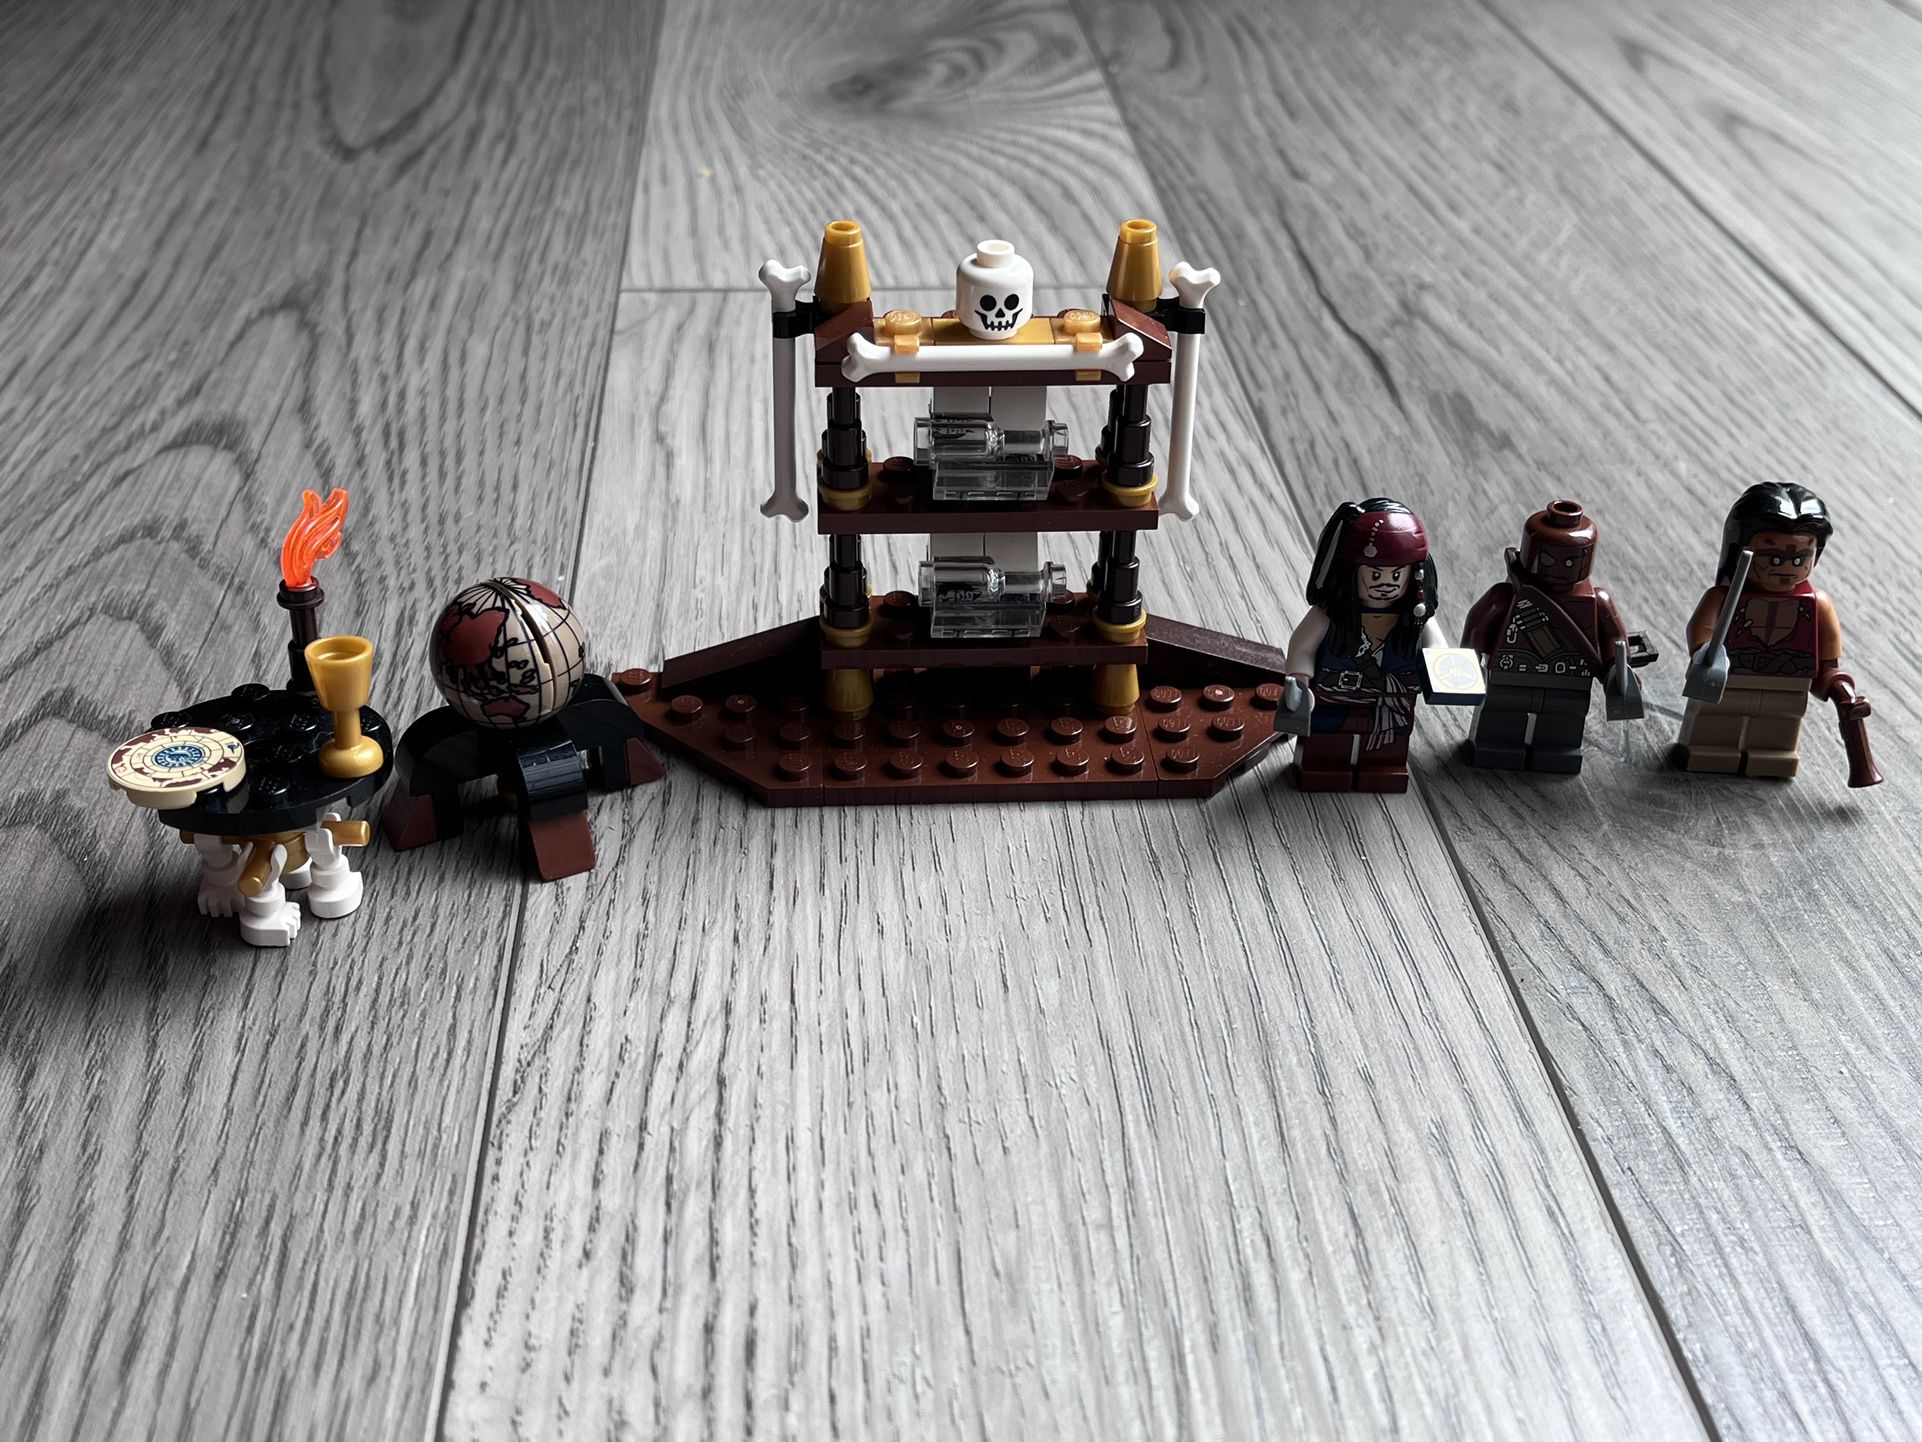 LEGO Pirates Of The Caribbean Set 4191 Complete for Sale in Mohnton, PA OfferUp